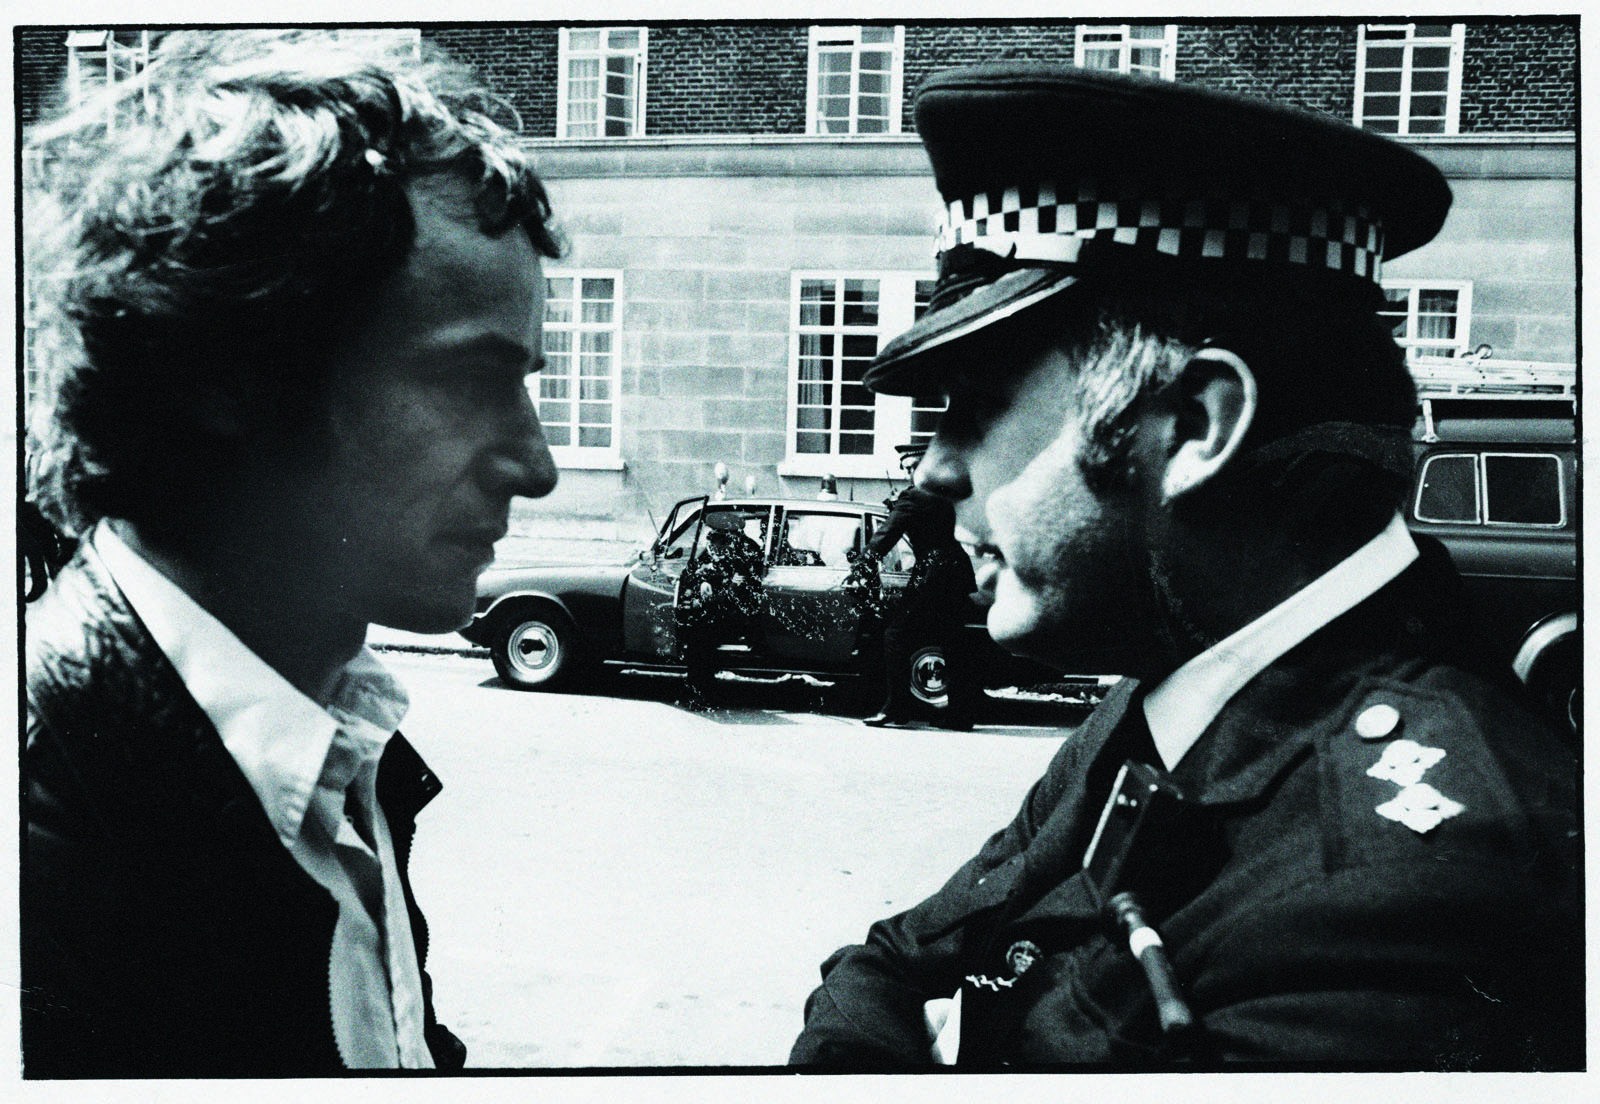 Duncan Campbell talking to a police officer at a demonstration in the 1980's.  Credit unknown.  Supplied by Duncan Campbell